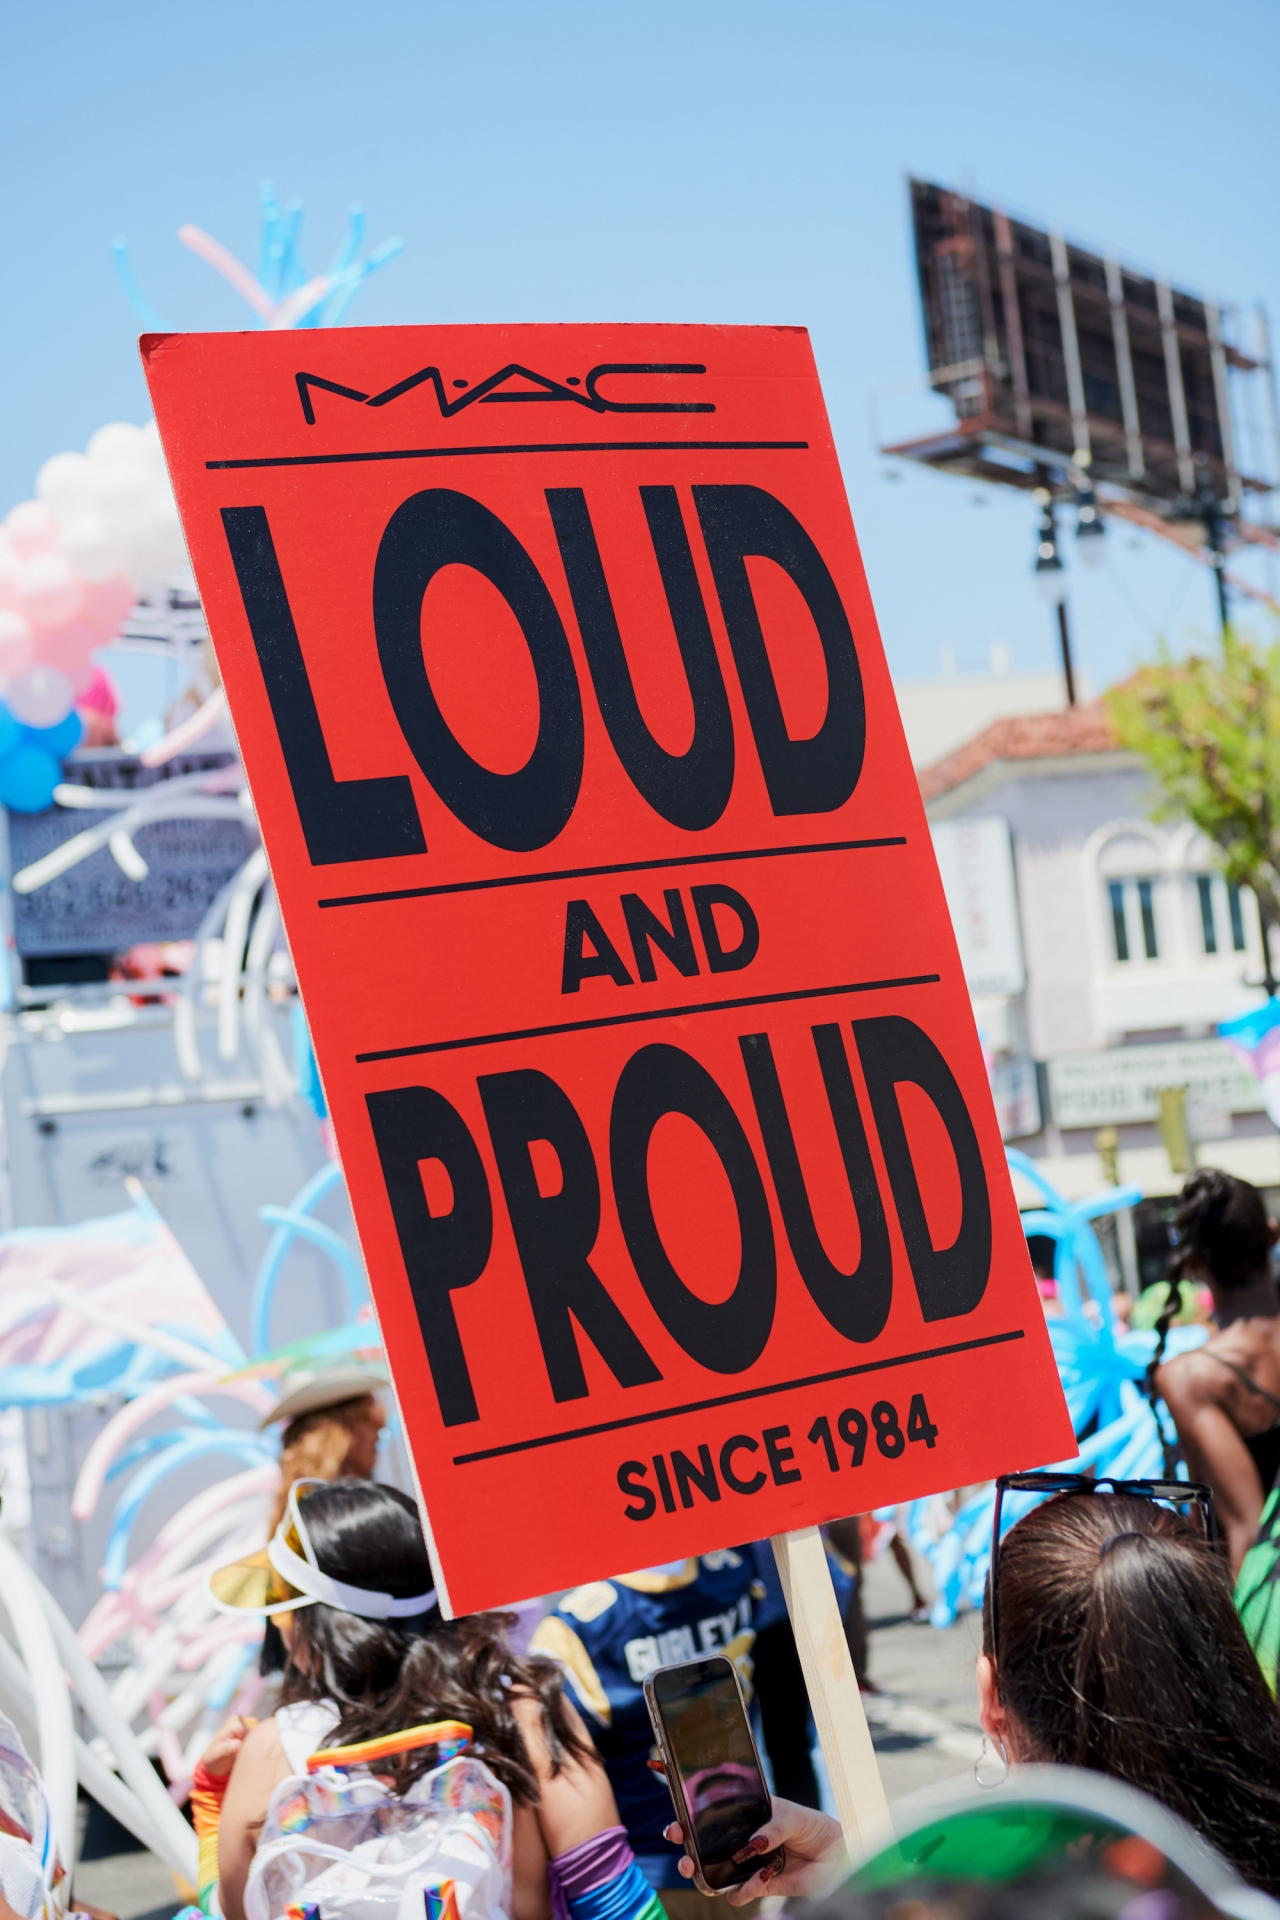 pride parade sign "Loud and Proud"